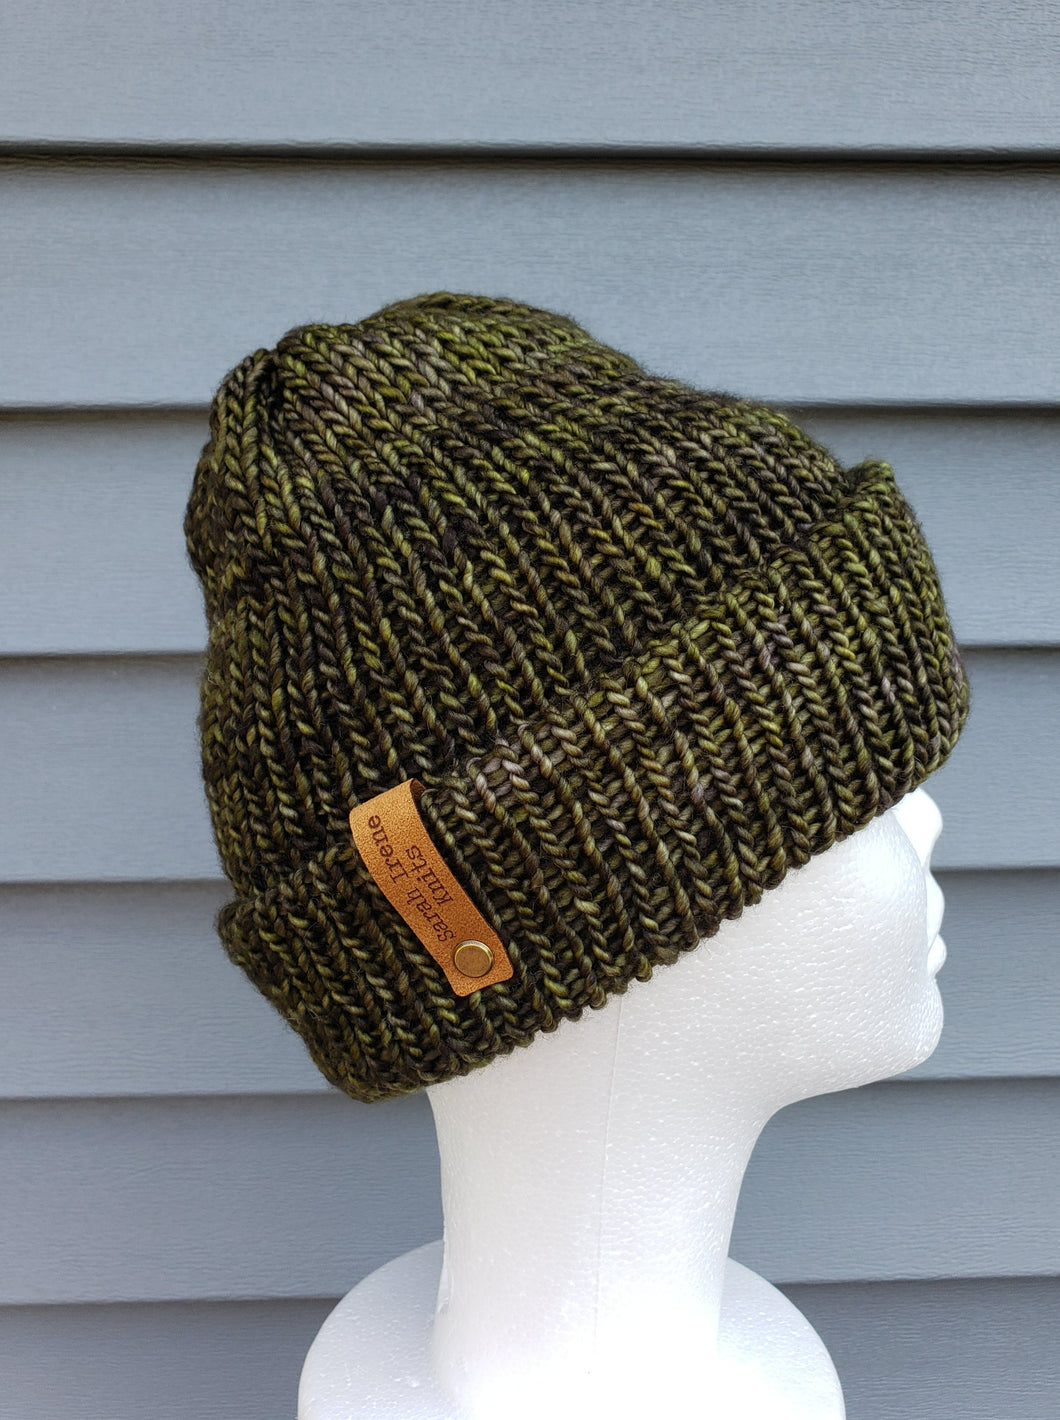 Double brim beanie in shades of green. No pom.